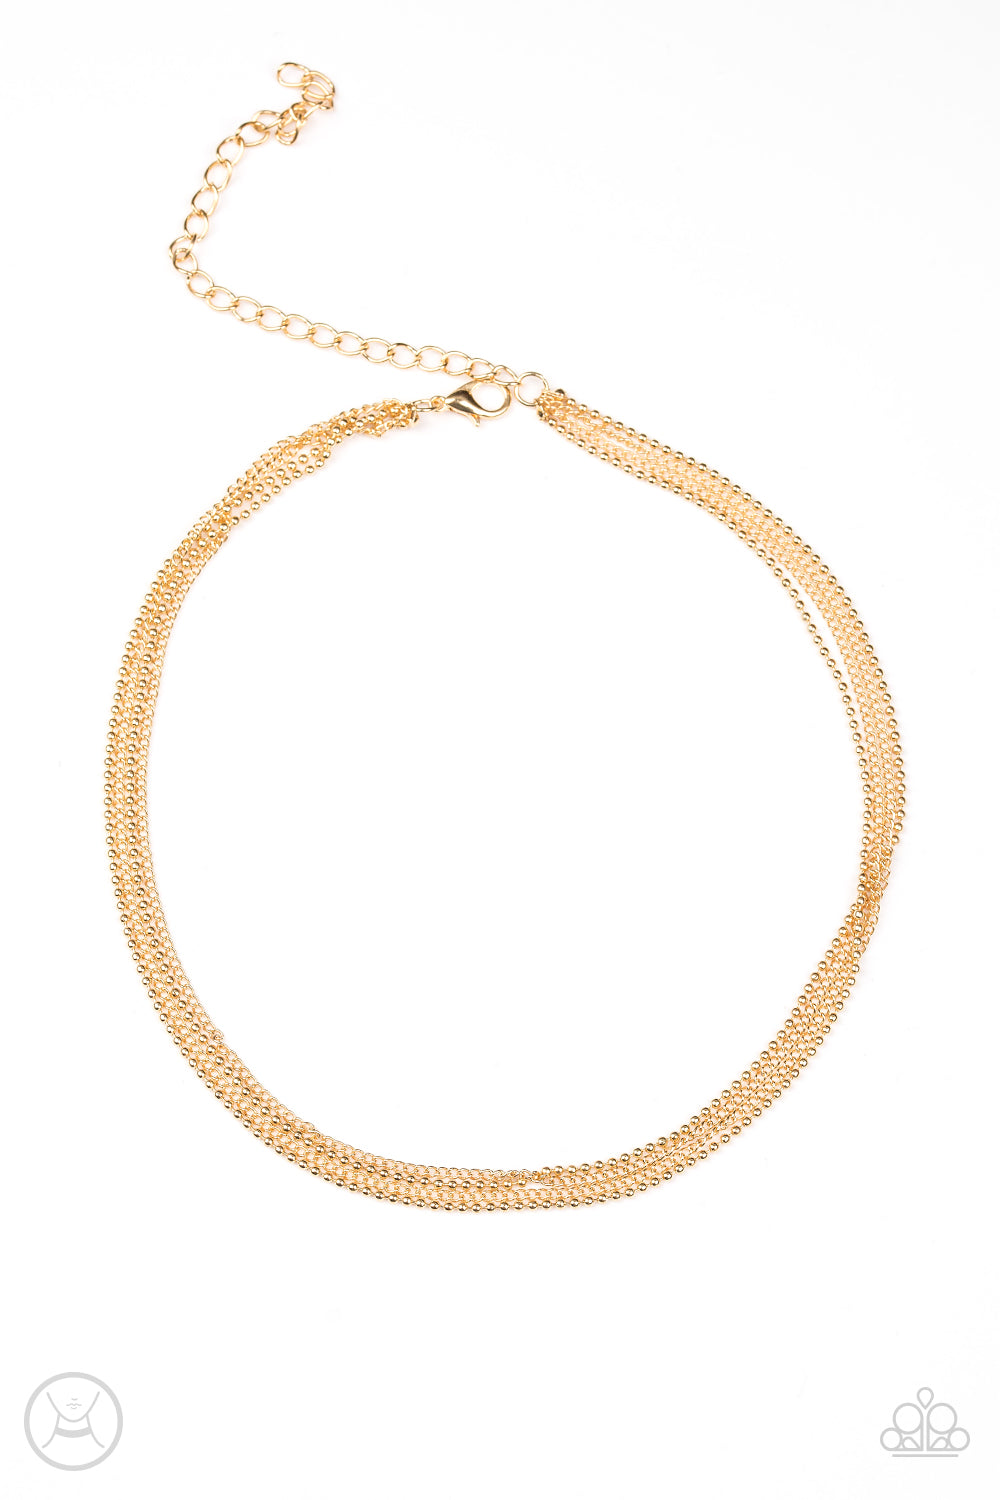 If You Dare - gold - Paparazzi necklace